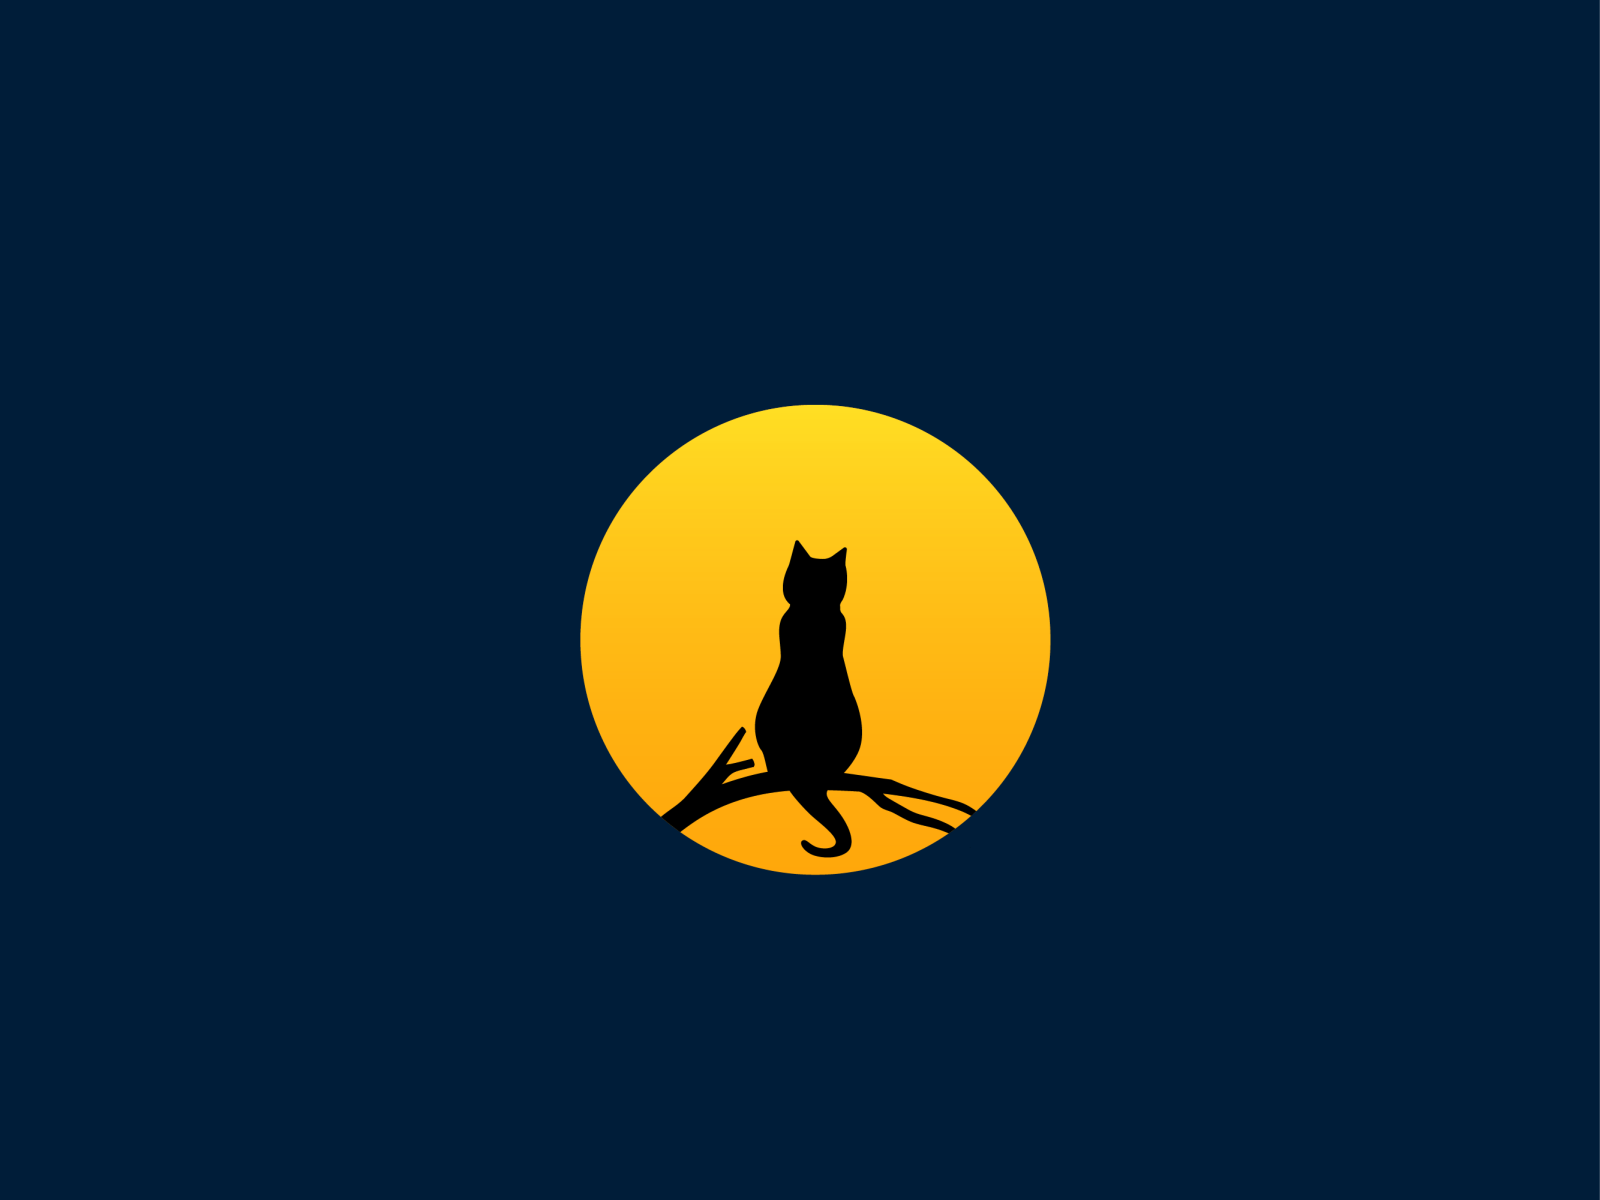 CAT AND SUN by S.Ouzakri on Dribbble